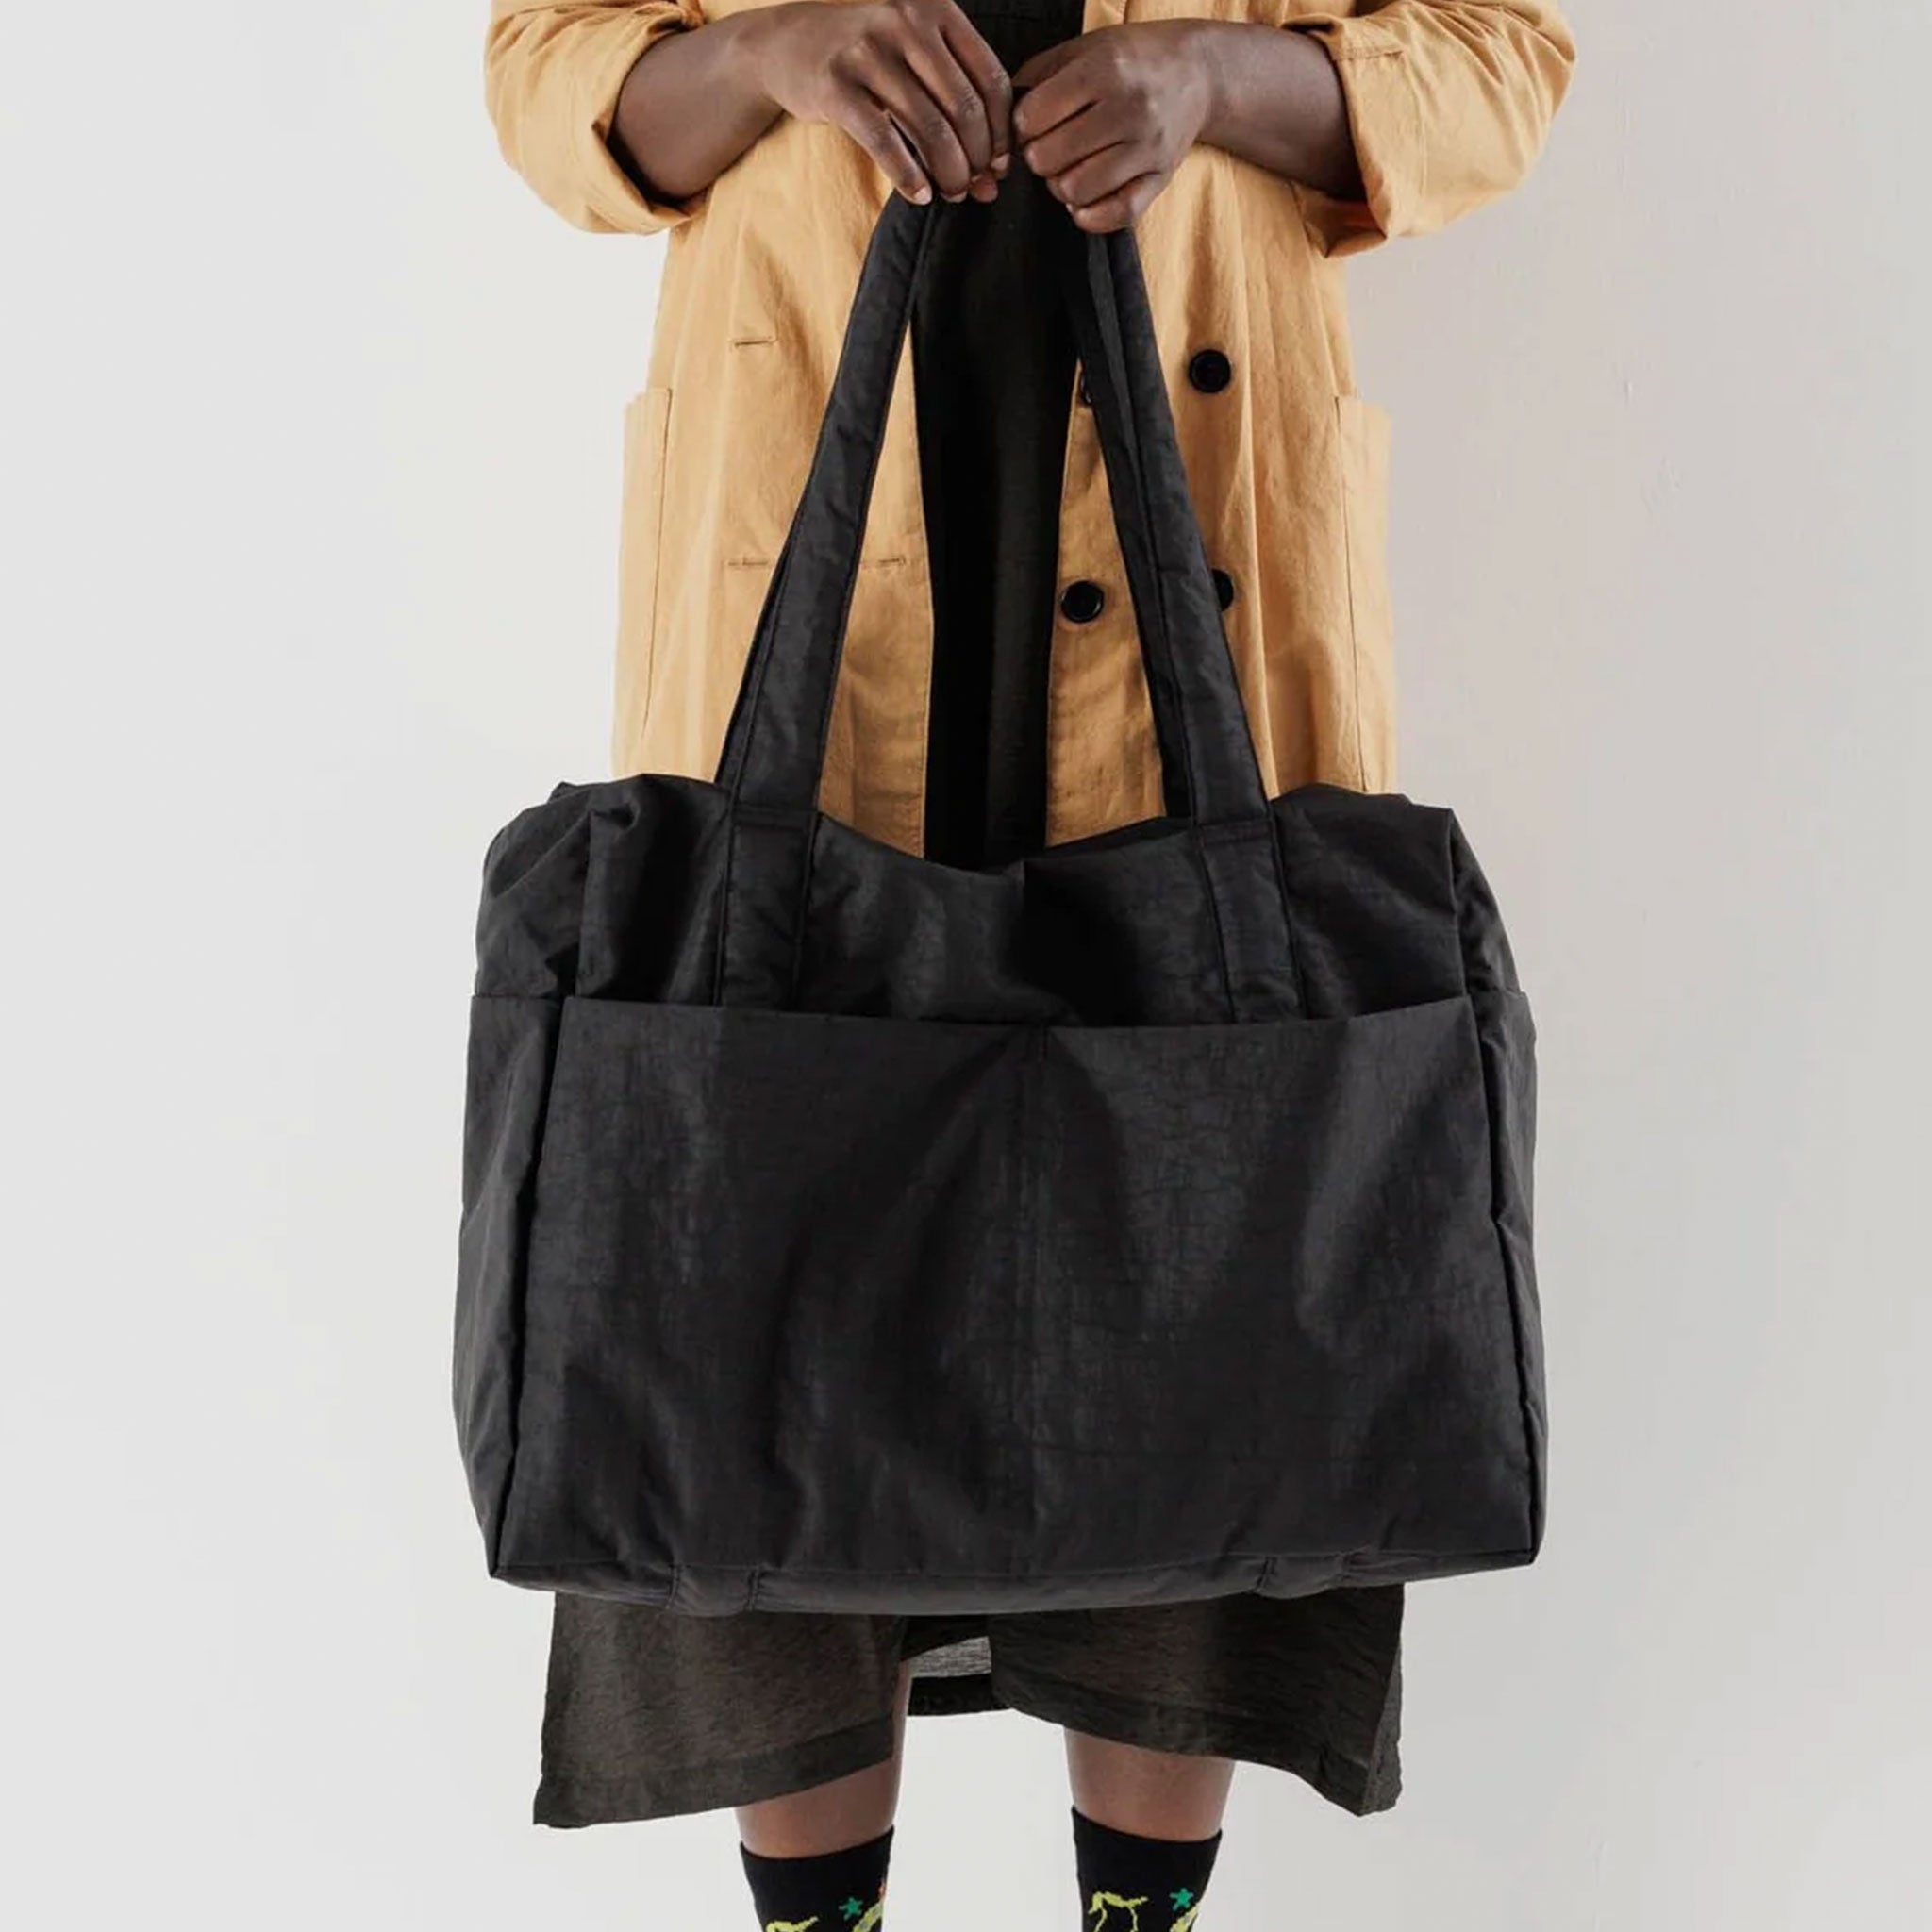 A black nylon tote bag with two straps and slits for attaching to a travel suitcase. 